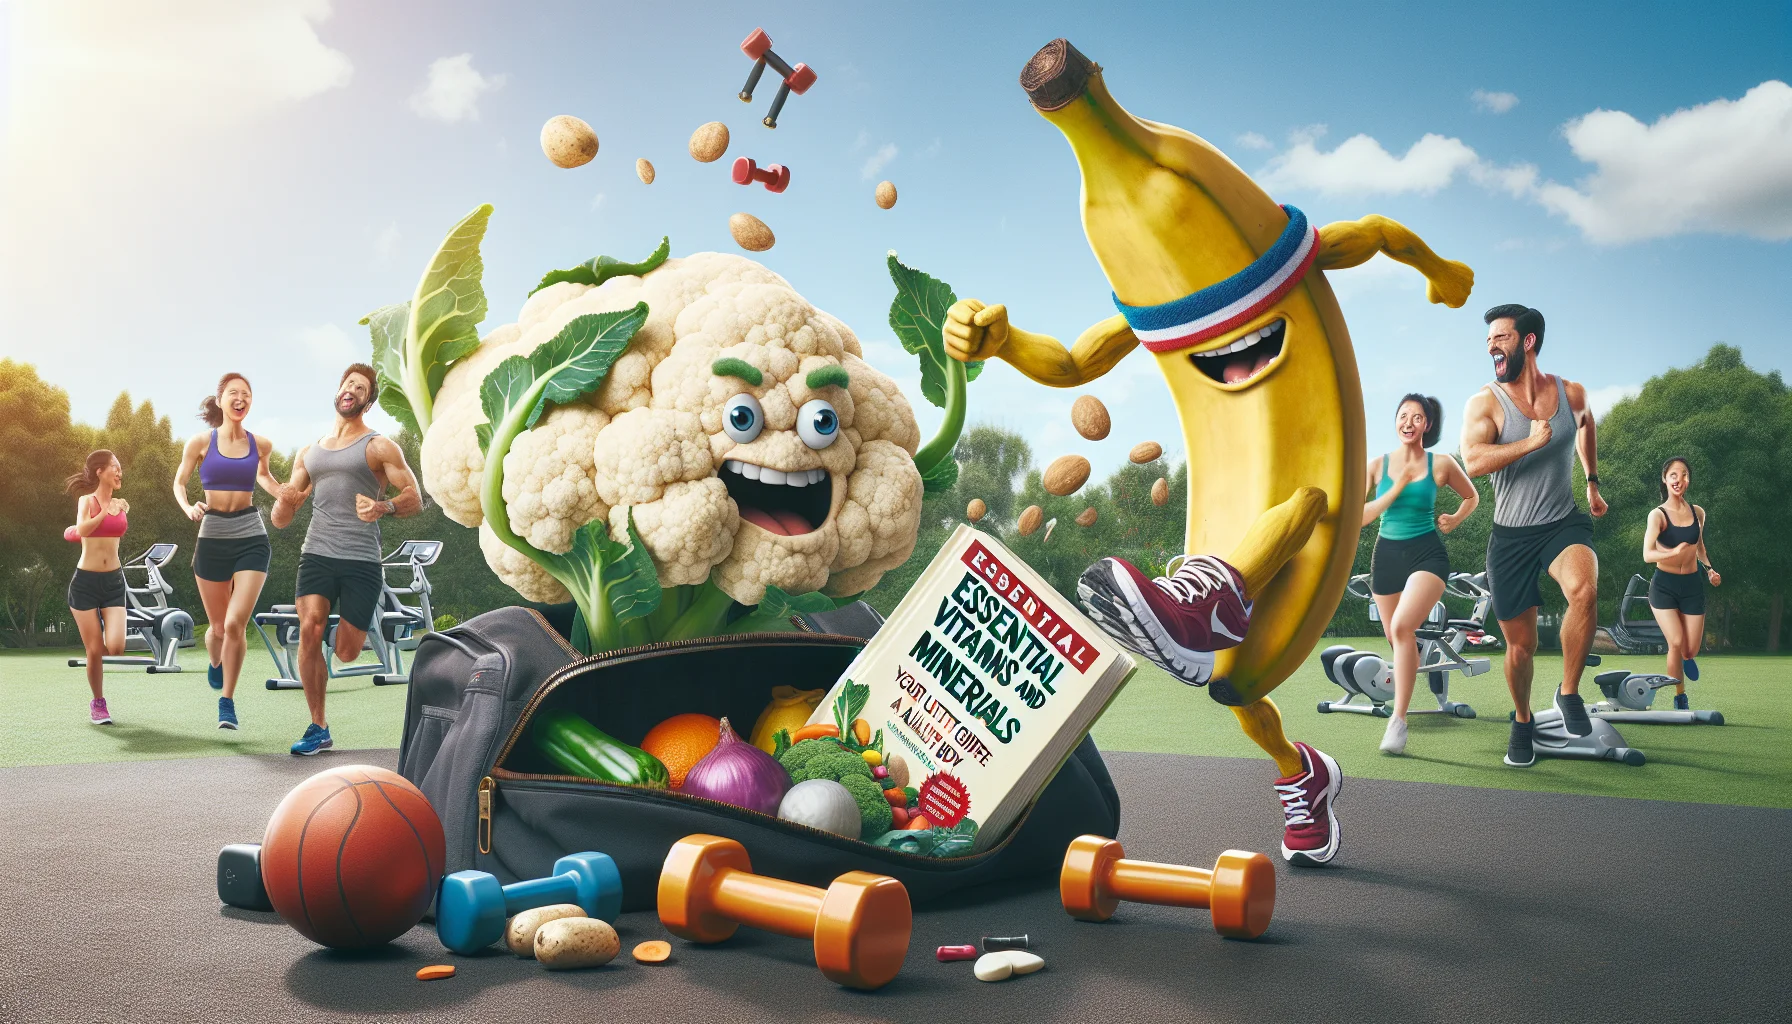 Craft a realistic image of a humorous scene that captures the essence of a healthy lifestyle. This scenario includes a display of 'Essential Vitamins and Minerals: Your Ultimate Guide for a Healthy Body' book in an amusing manner. The book is flying out of an open gym bag in the midst of various exercise equipment. A cauliflower in running shoes and a banana in a sweatband (both anthropomorphized) are playfully chasing after it. They are in an outdoor park with people of different genders and descents also engaging in diverse physical activities in the background, advocating the importance of exercise for a healthy body.